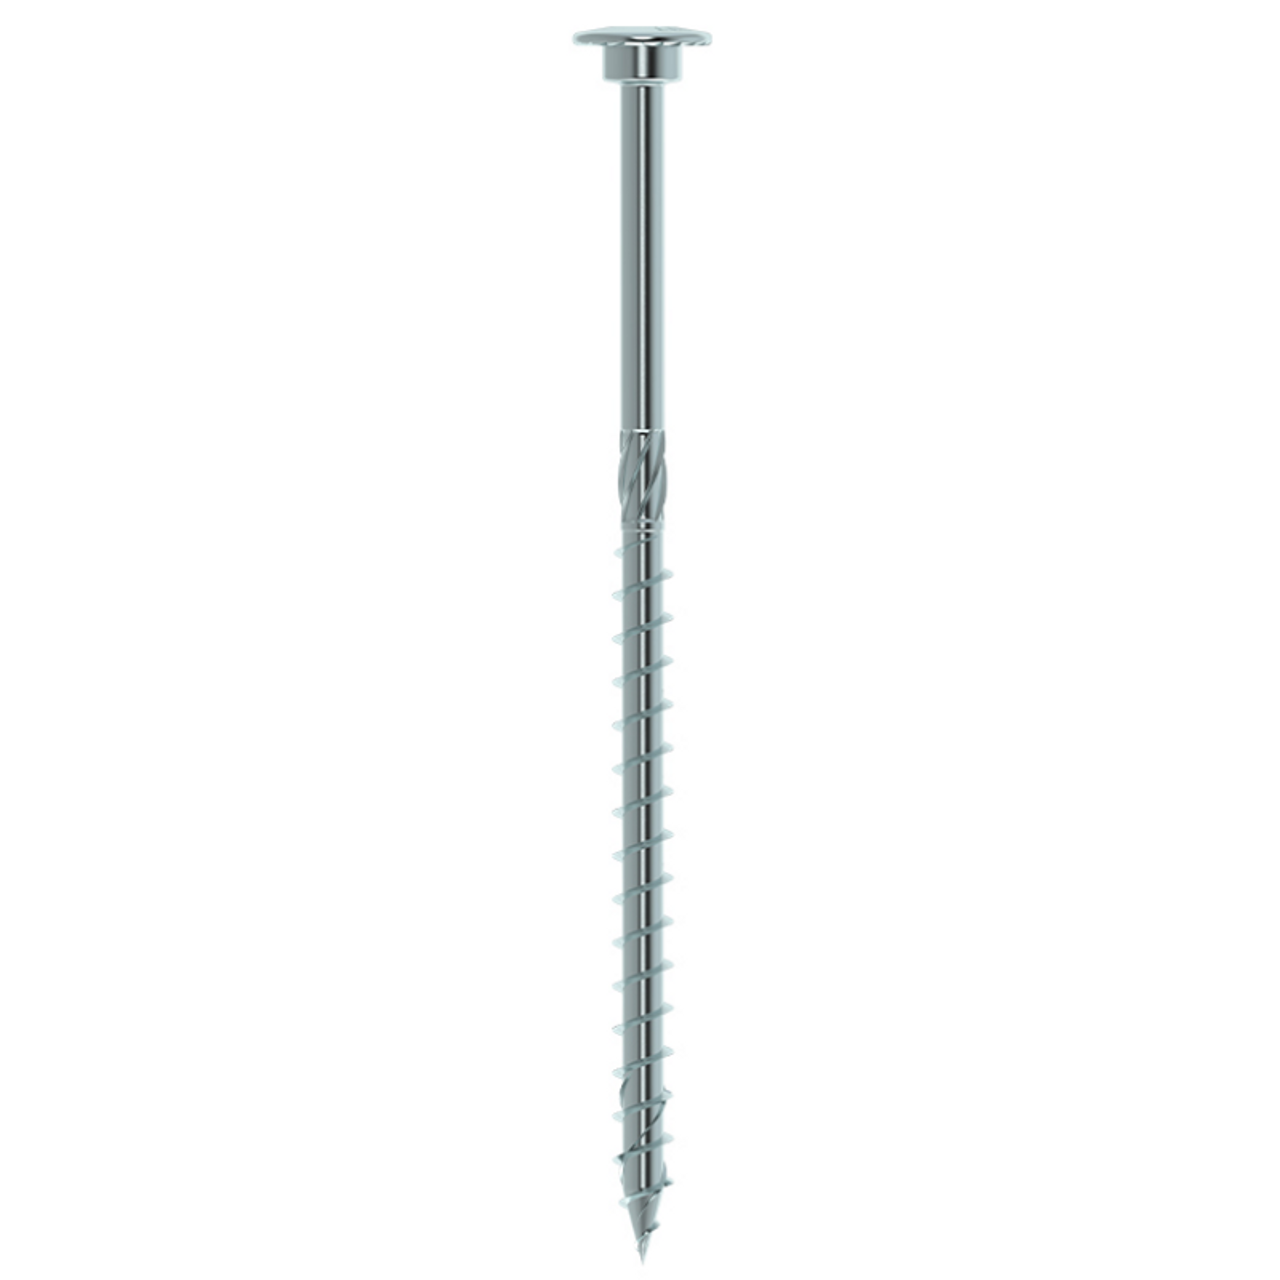 Buy Online EUROTEC 6mm SAWTEC Washer Head Screws with Silver Zinc for the Construction Industry and Installers in Perth, Sydney and Brisbane